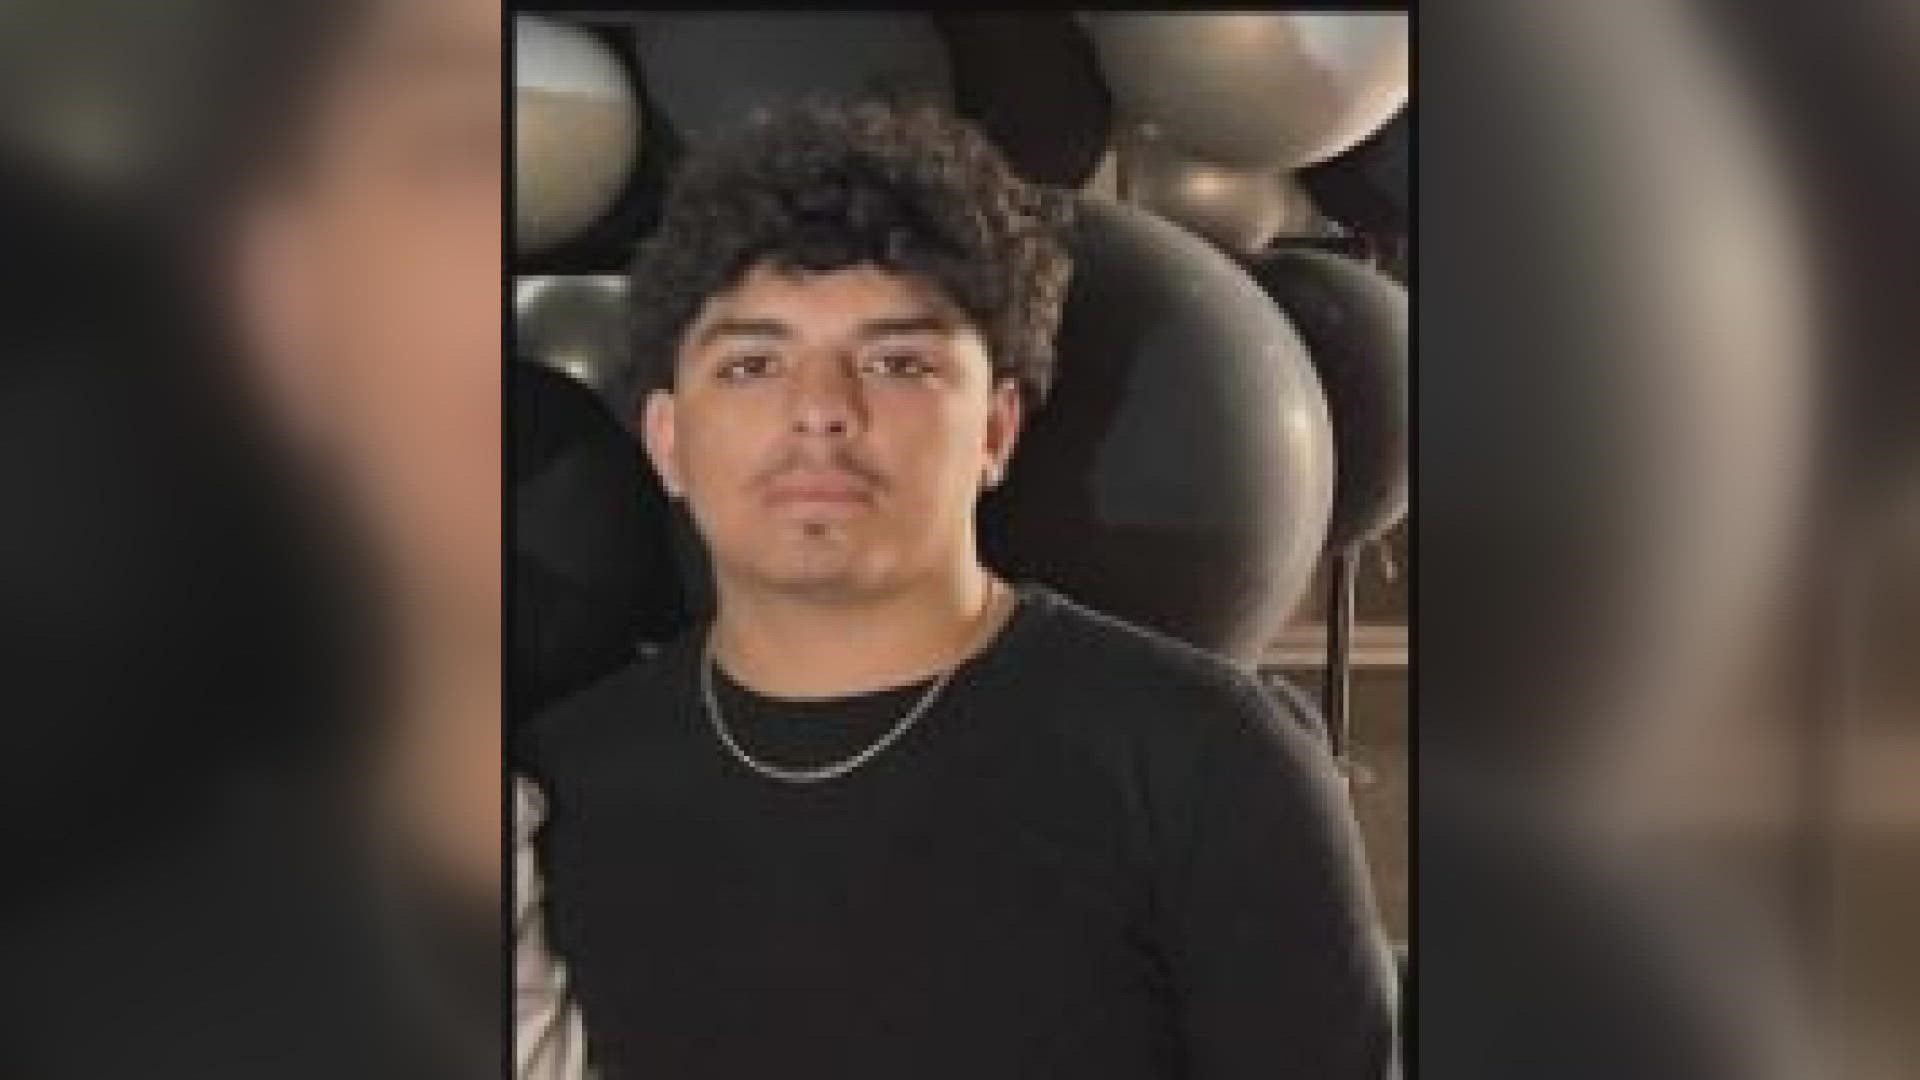 Phoenix police said that 17-year-old Jesse Sainz-Camacho was taken from his home. Another man in the house was shot and is now in the hospital.